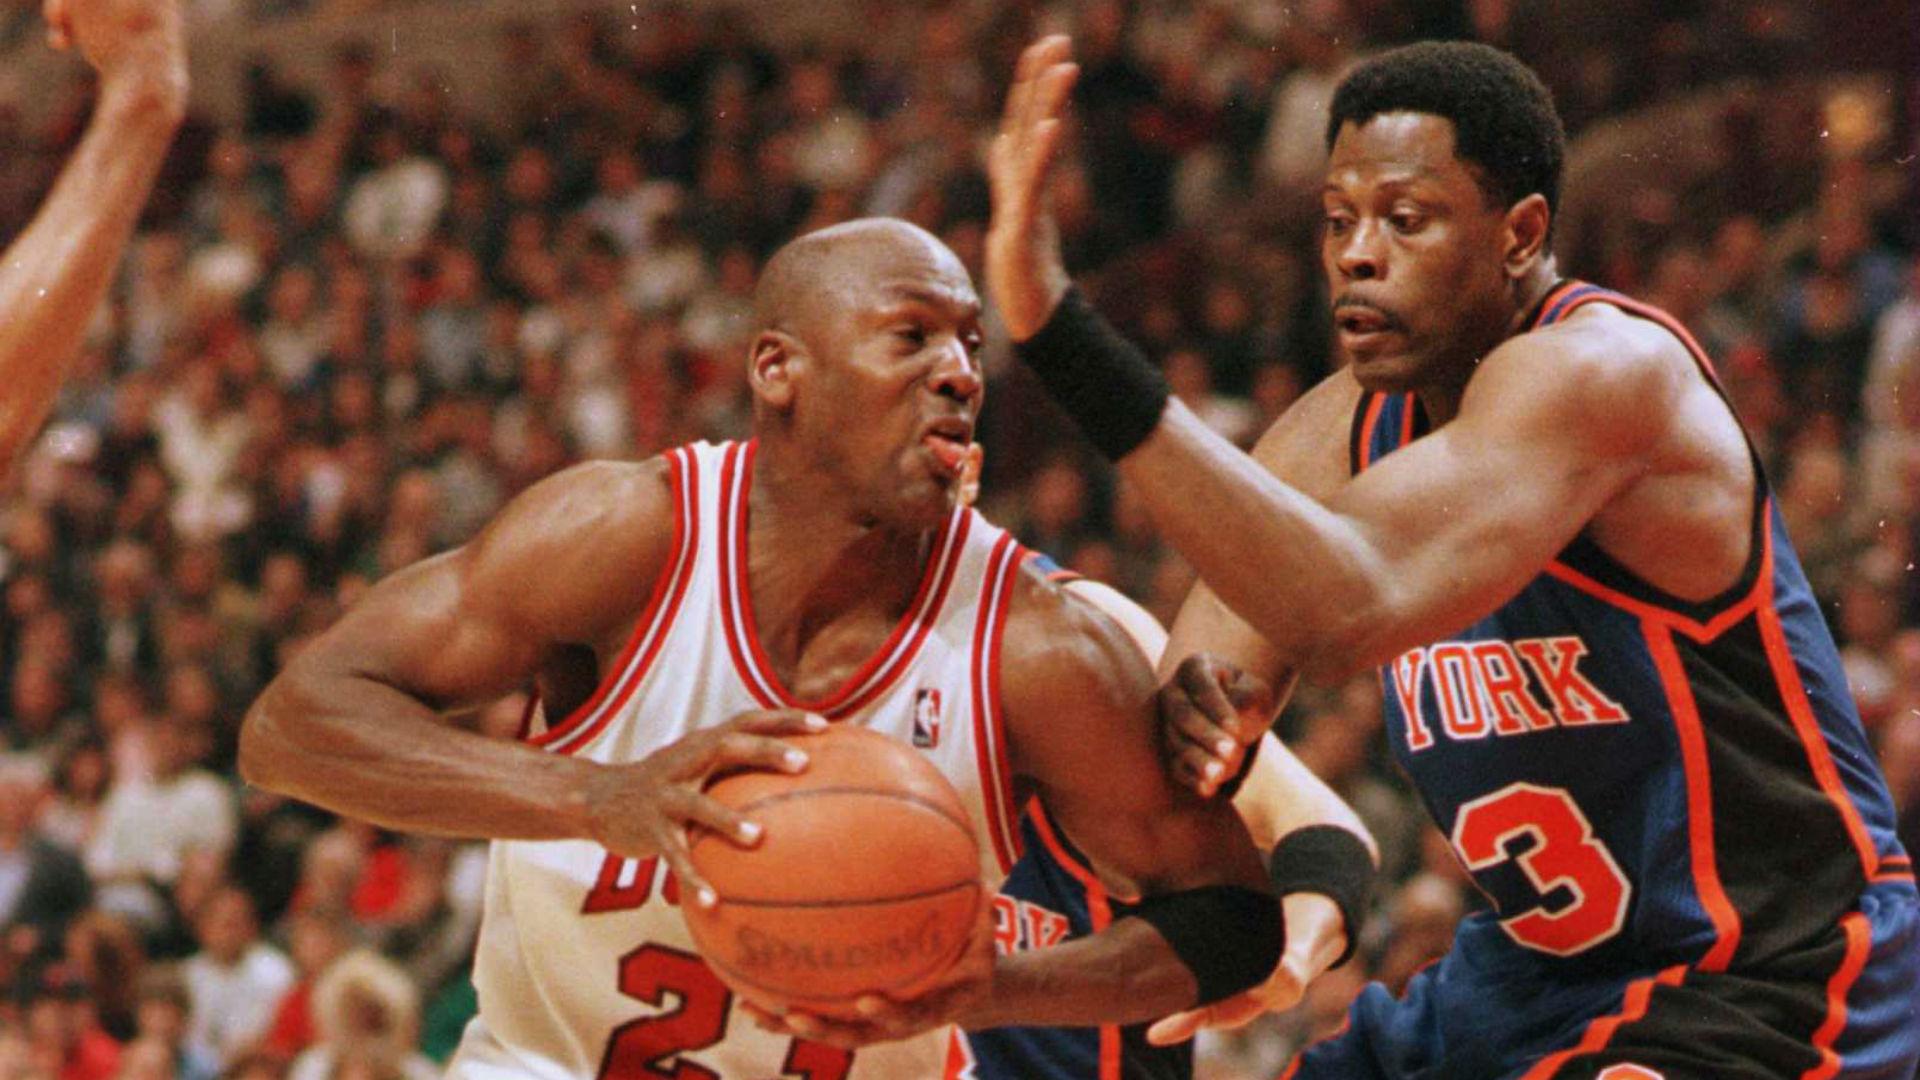 Patrick Ewing says he wouldn't have joined 'superteam' to win a